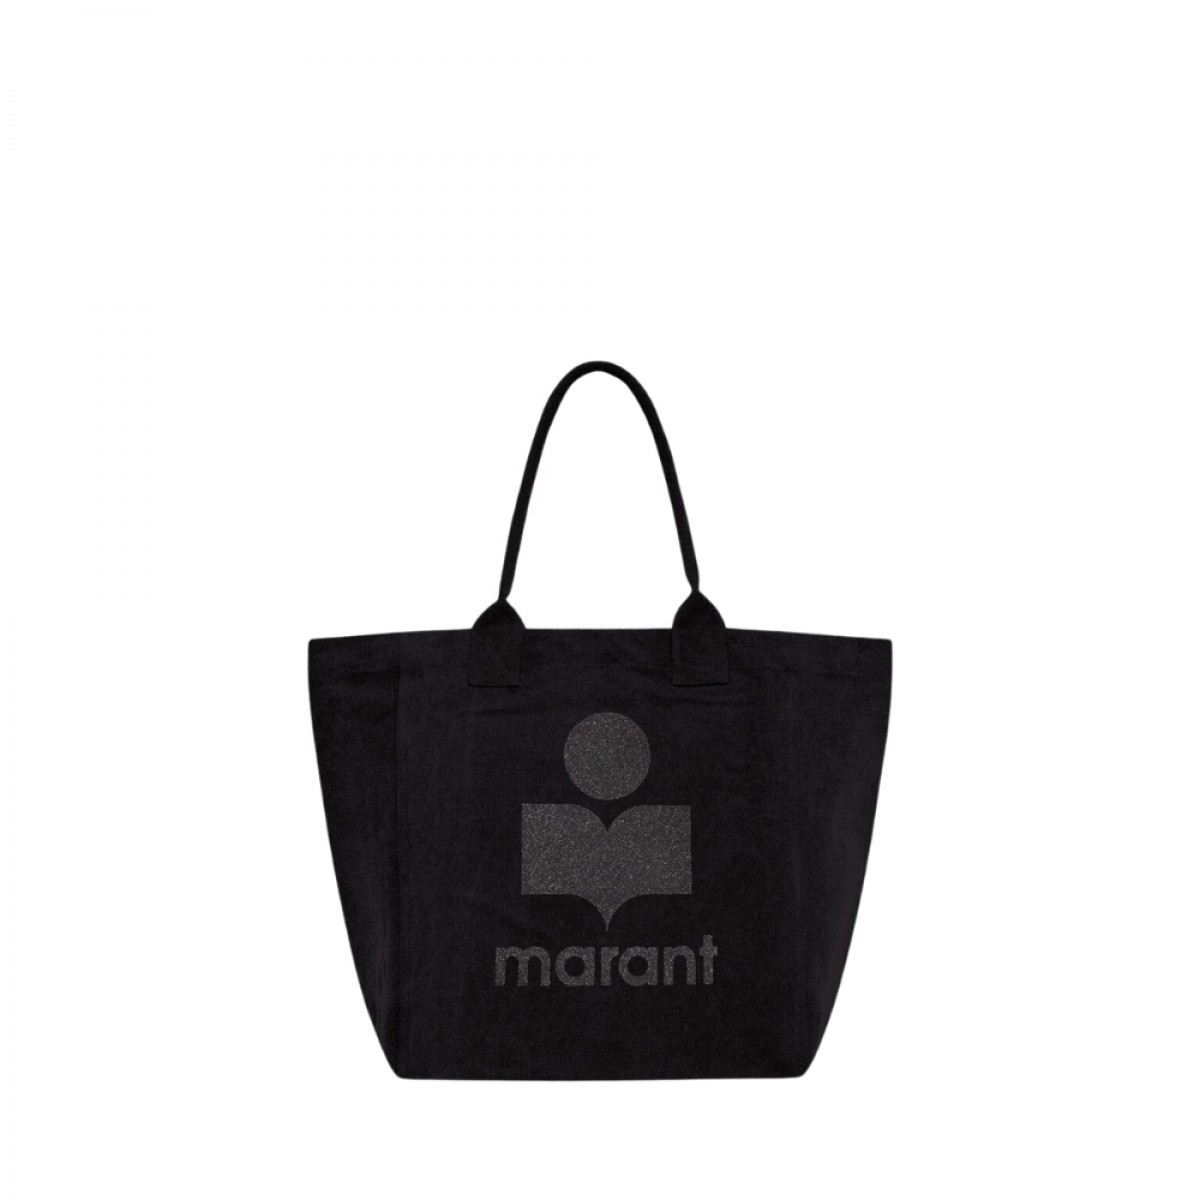 small yenky logo tote bag - black - front